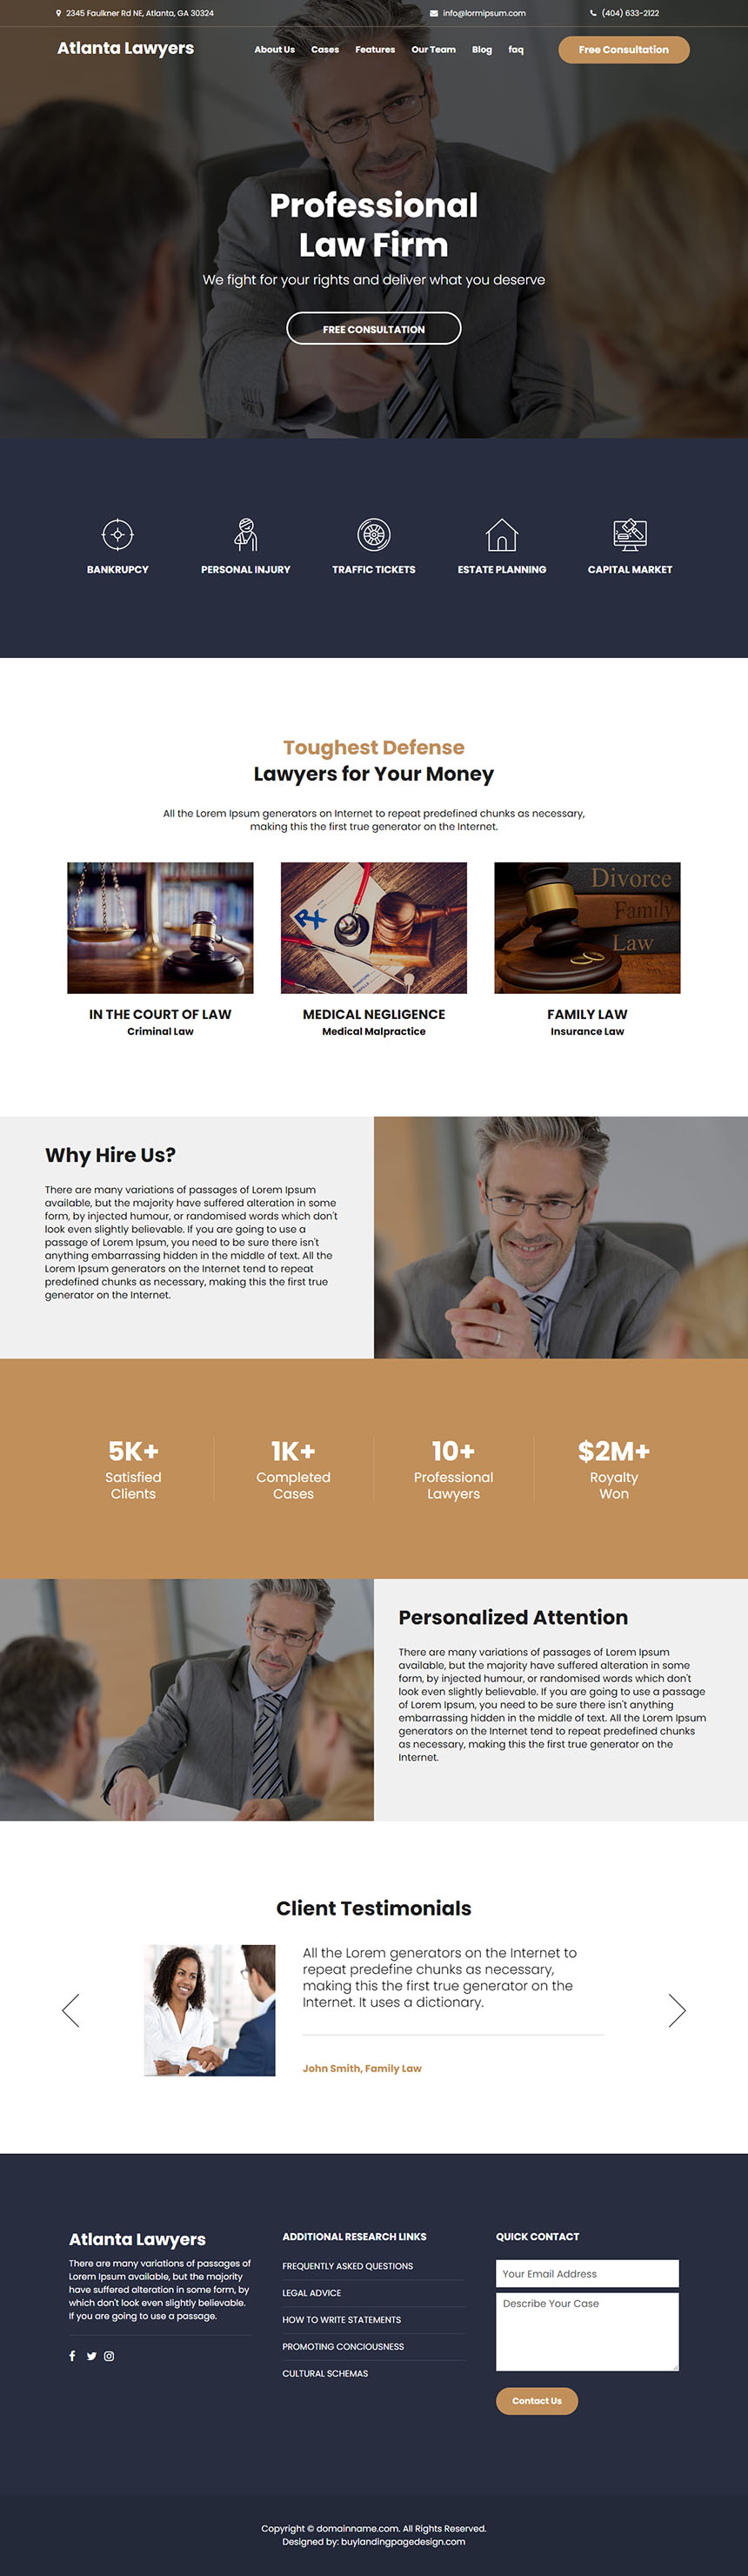 professional law firm free consultation responsive website design